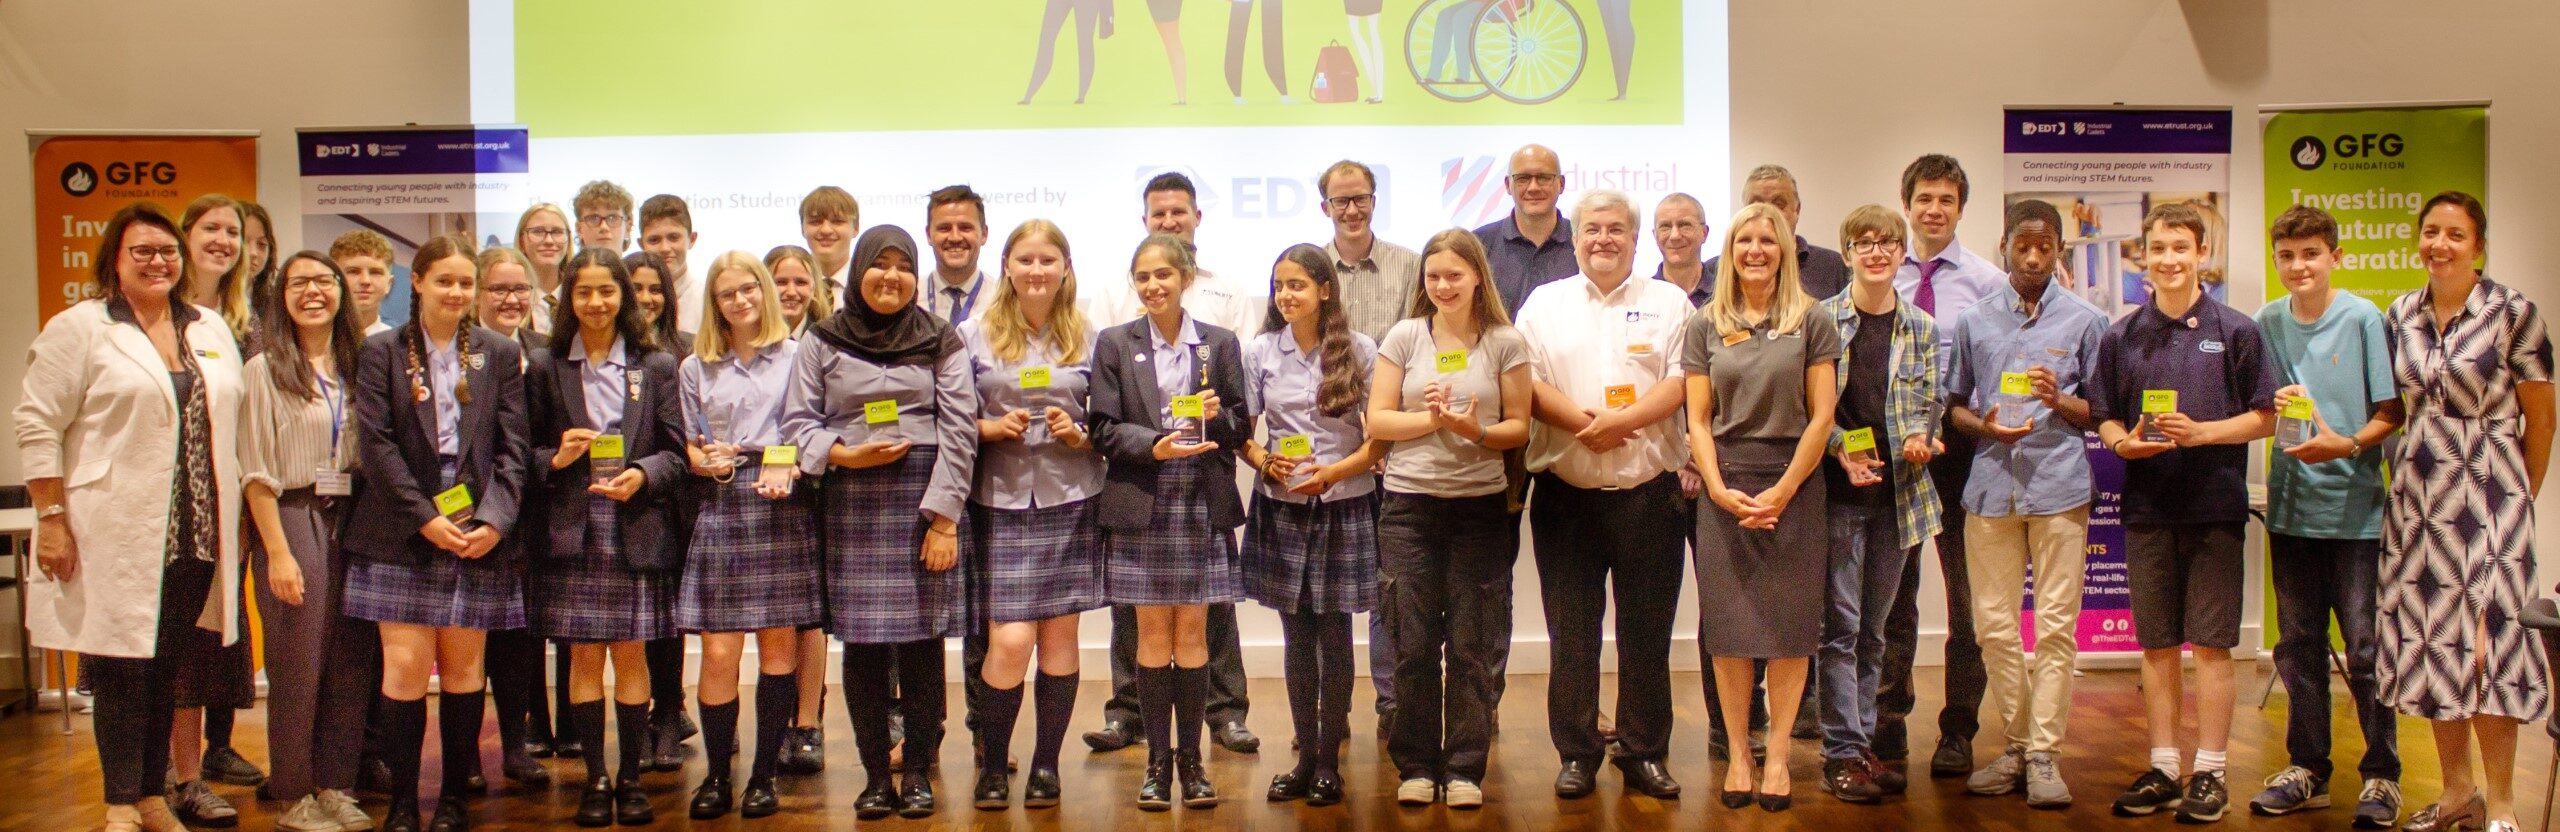 Celebrating Student Success: GFG Foundation’s Student Programme wraps up with Grand Final